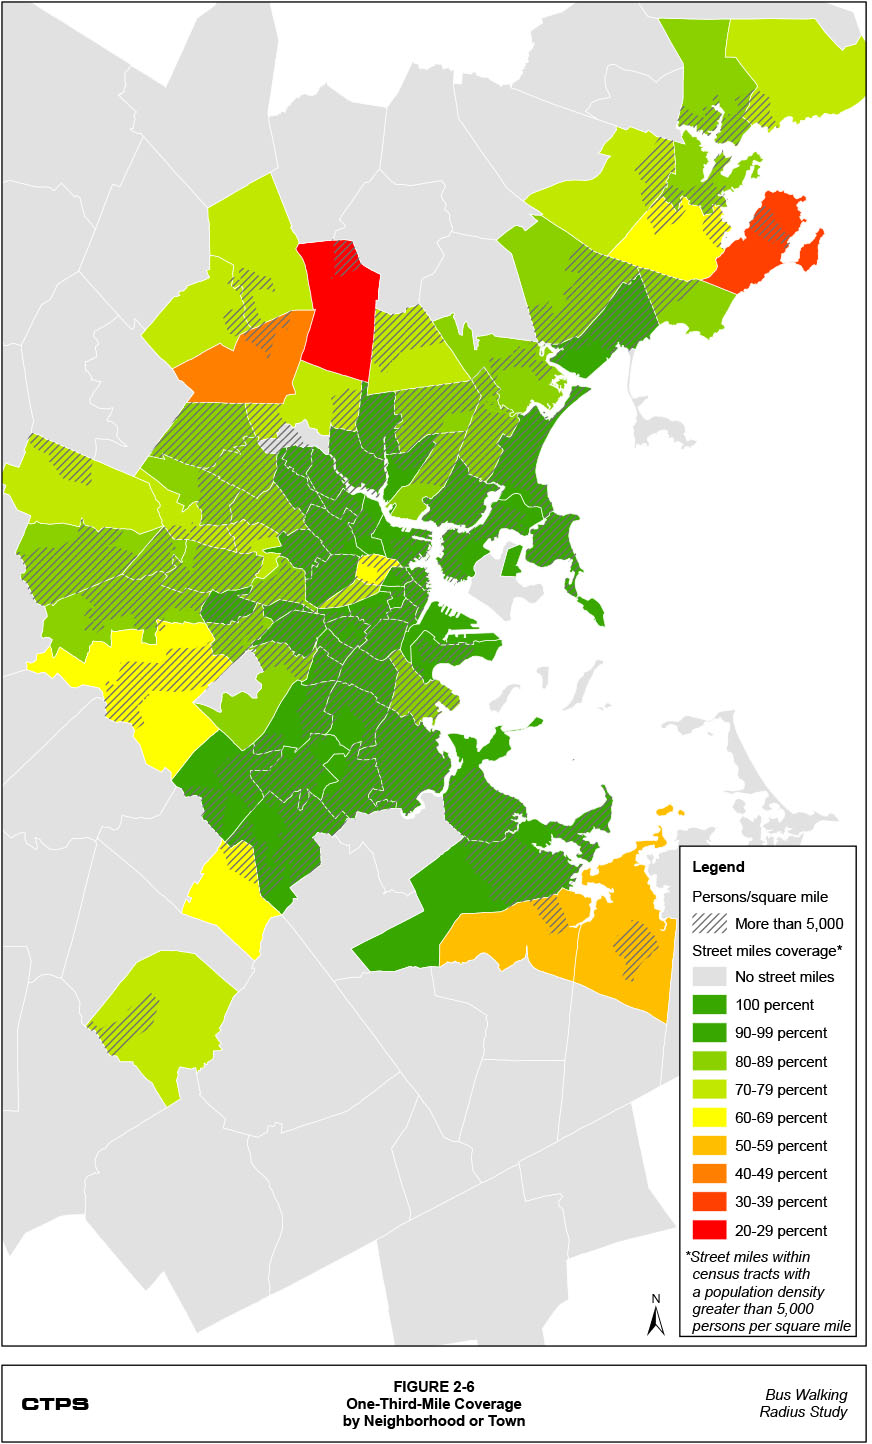 Figure 2-6: One-Third-Mile Coverage by Neighborhood or Town. This is a map that shows the location of census tracts with a population density greater than 5,000 persons per square mile. It also shows, for each town that has at least one of these census tracts, that town’s street mile coverage.